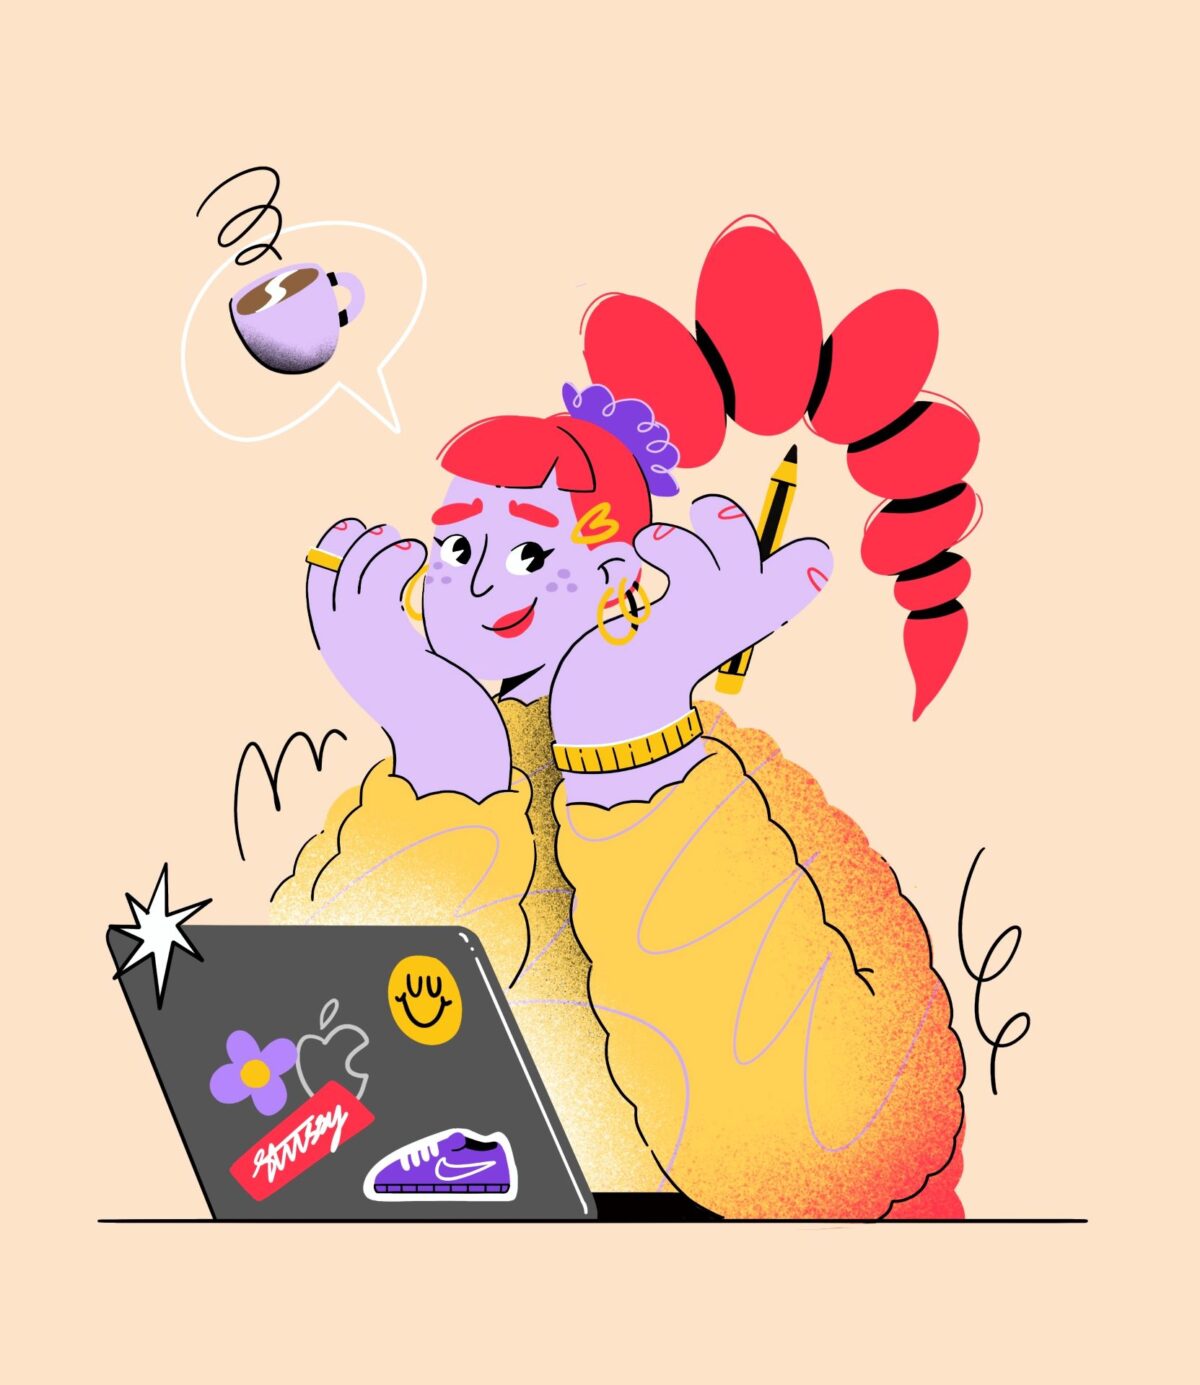 Illustration of a character working at a laptop